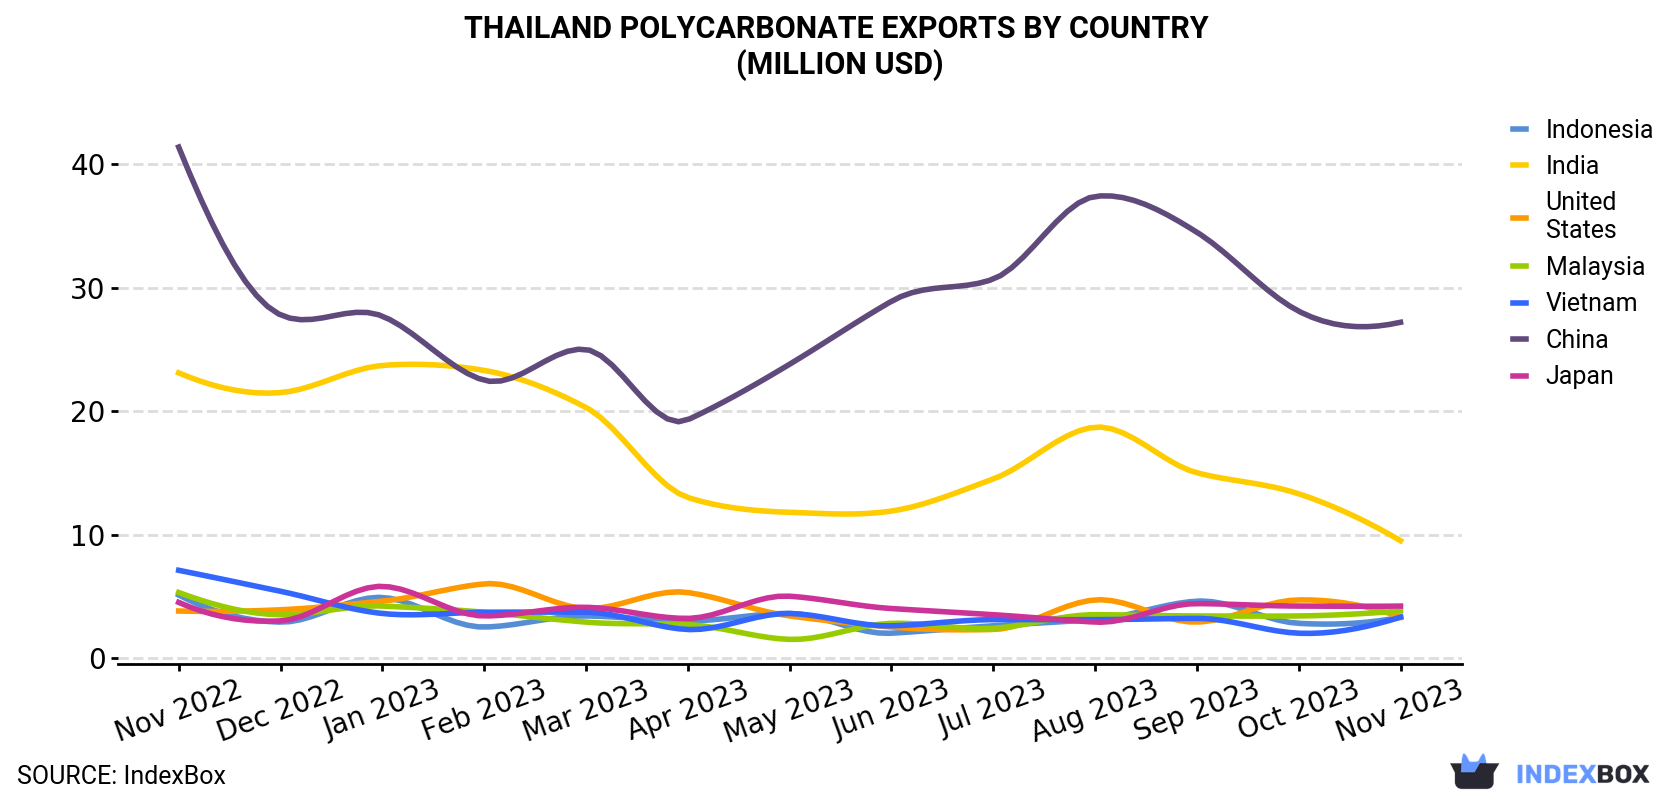 Thailand Polycarbonate Exports By Country (Million USD)